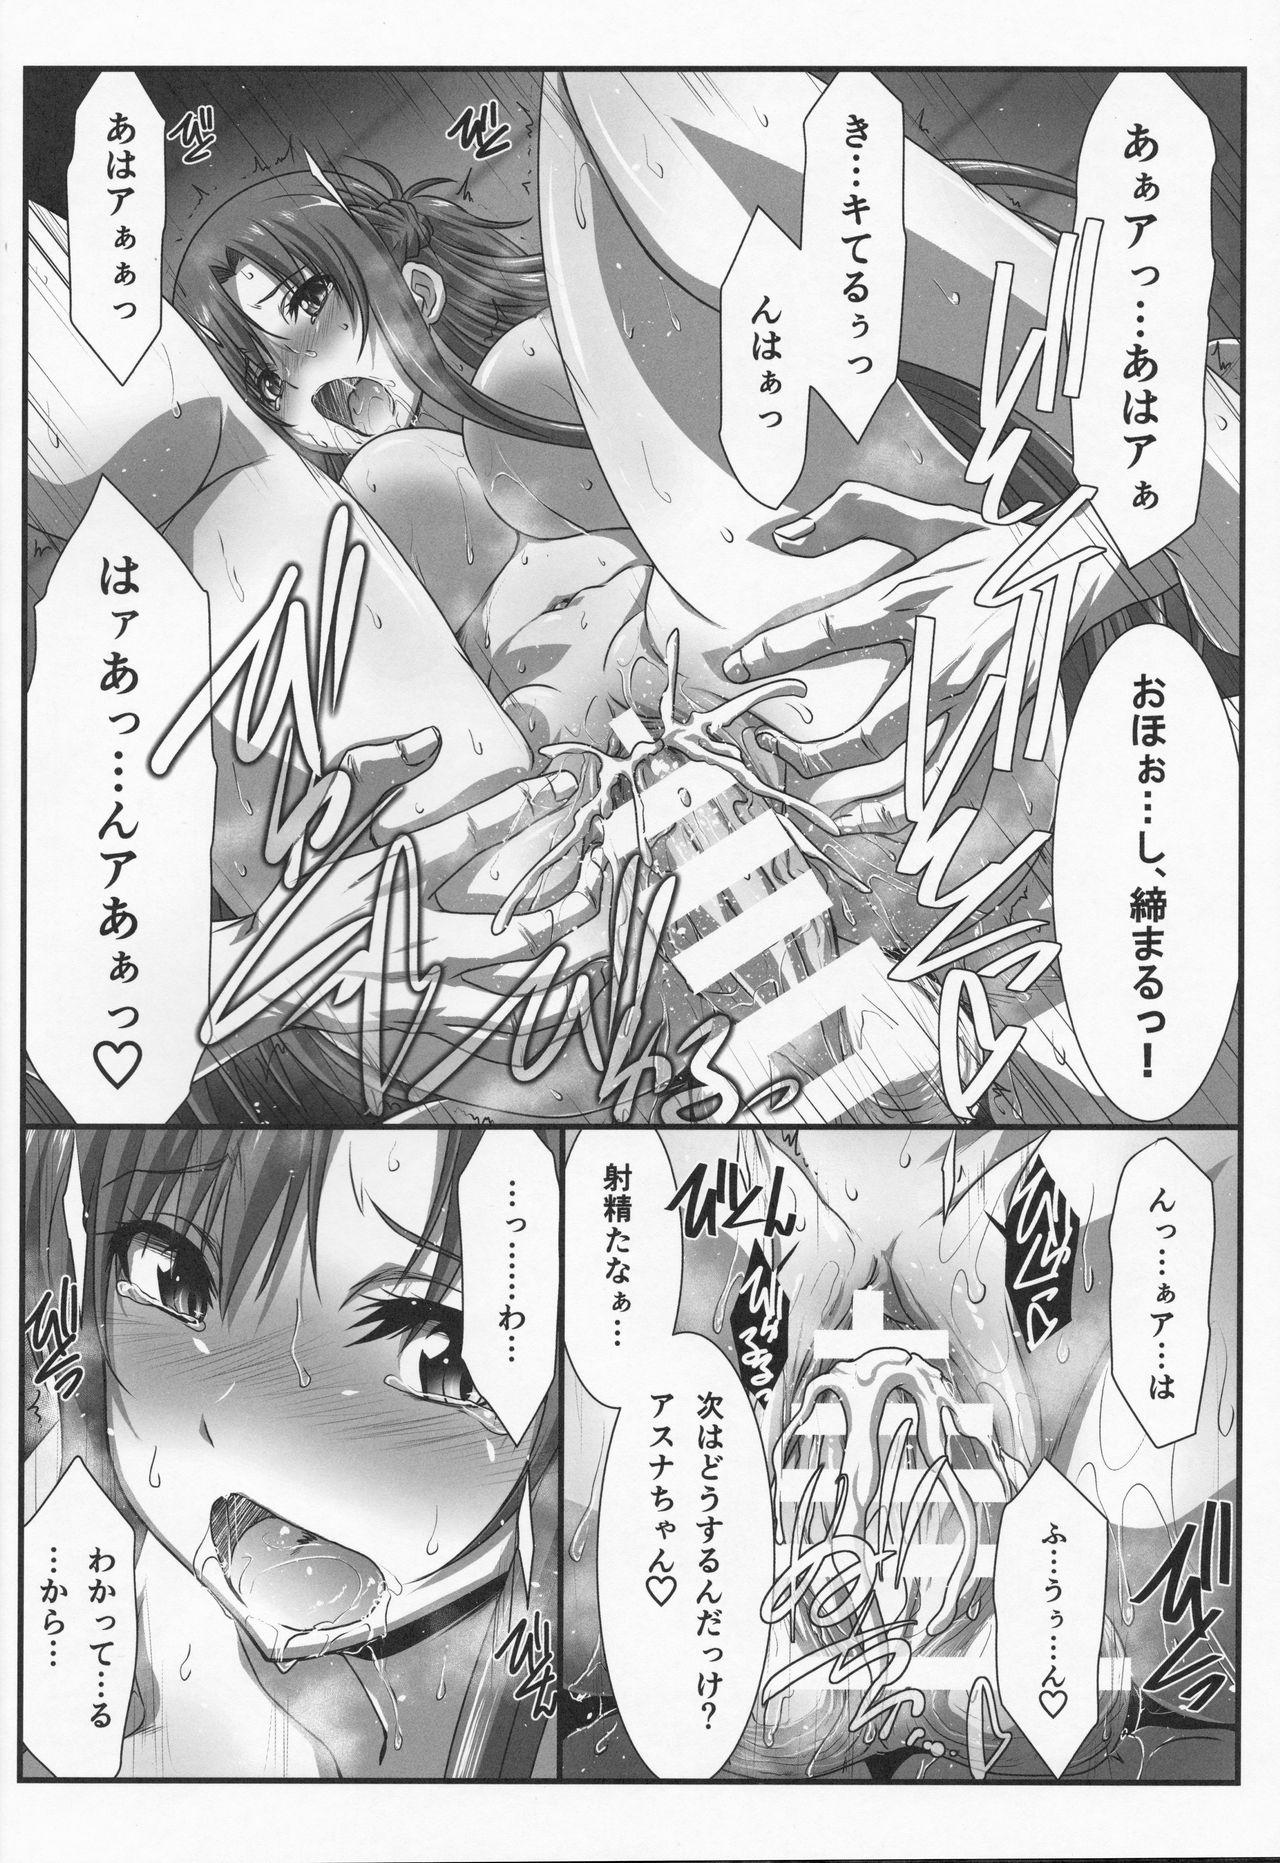 Gozando Astral Bout Ver. 42 - Sword art online Alone - Page 11